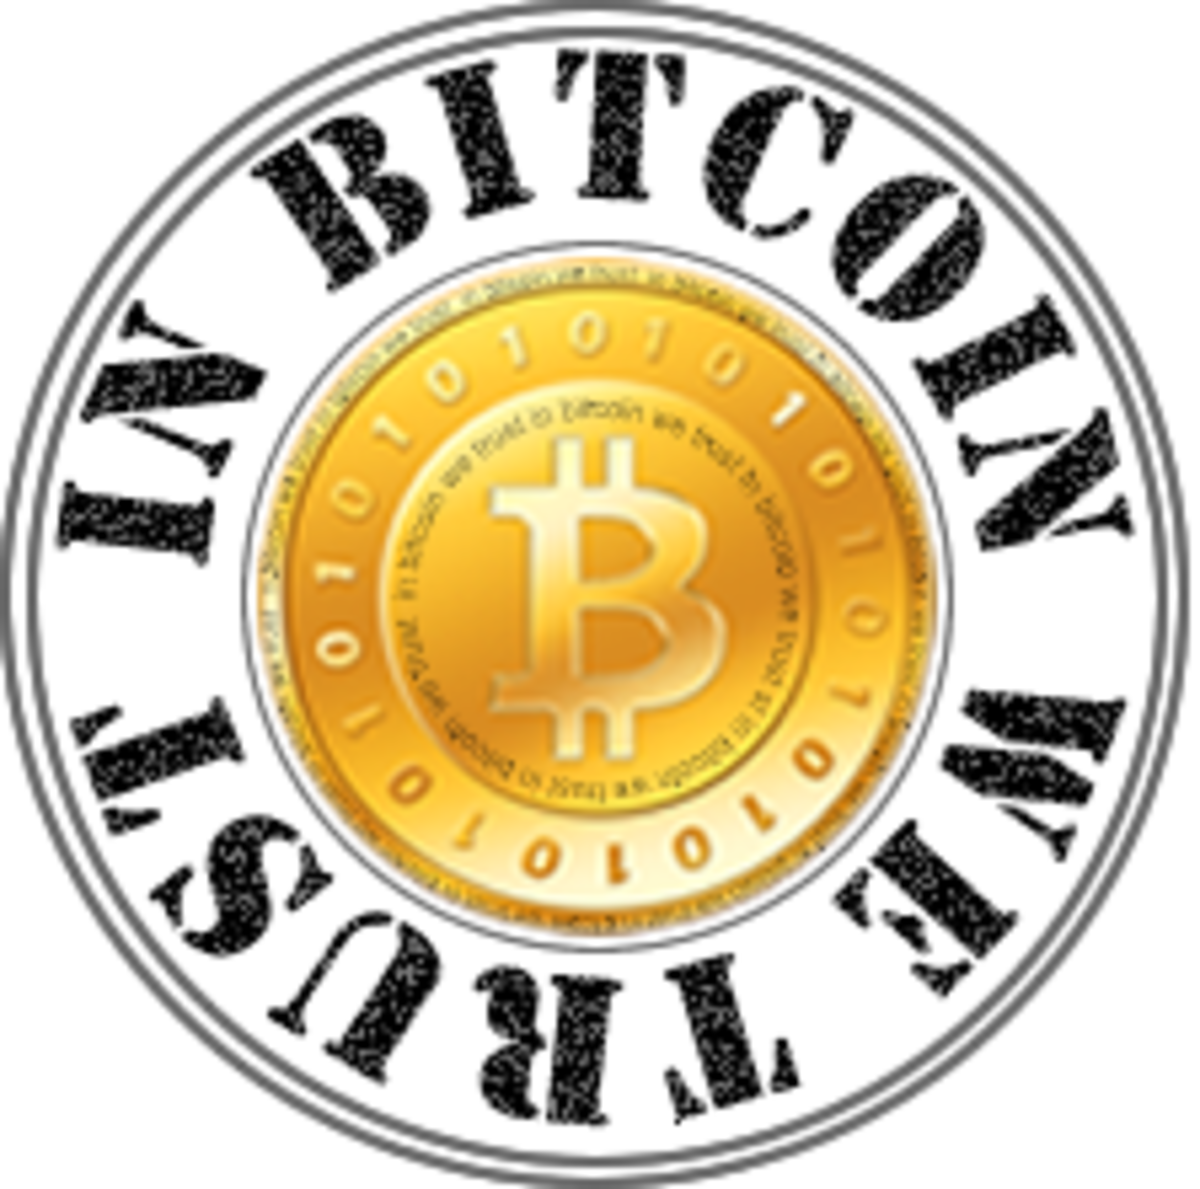 Op-ed - In Bitcoin We Trust Launches into the Bitcoin Ecosystem